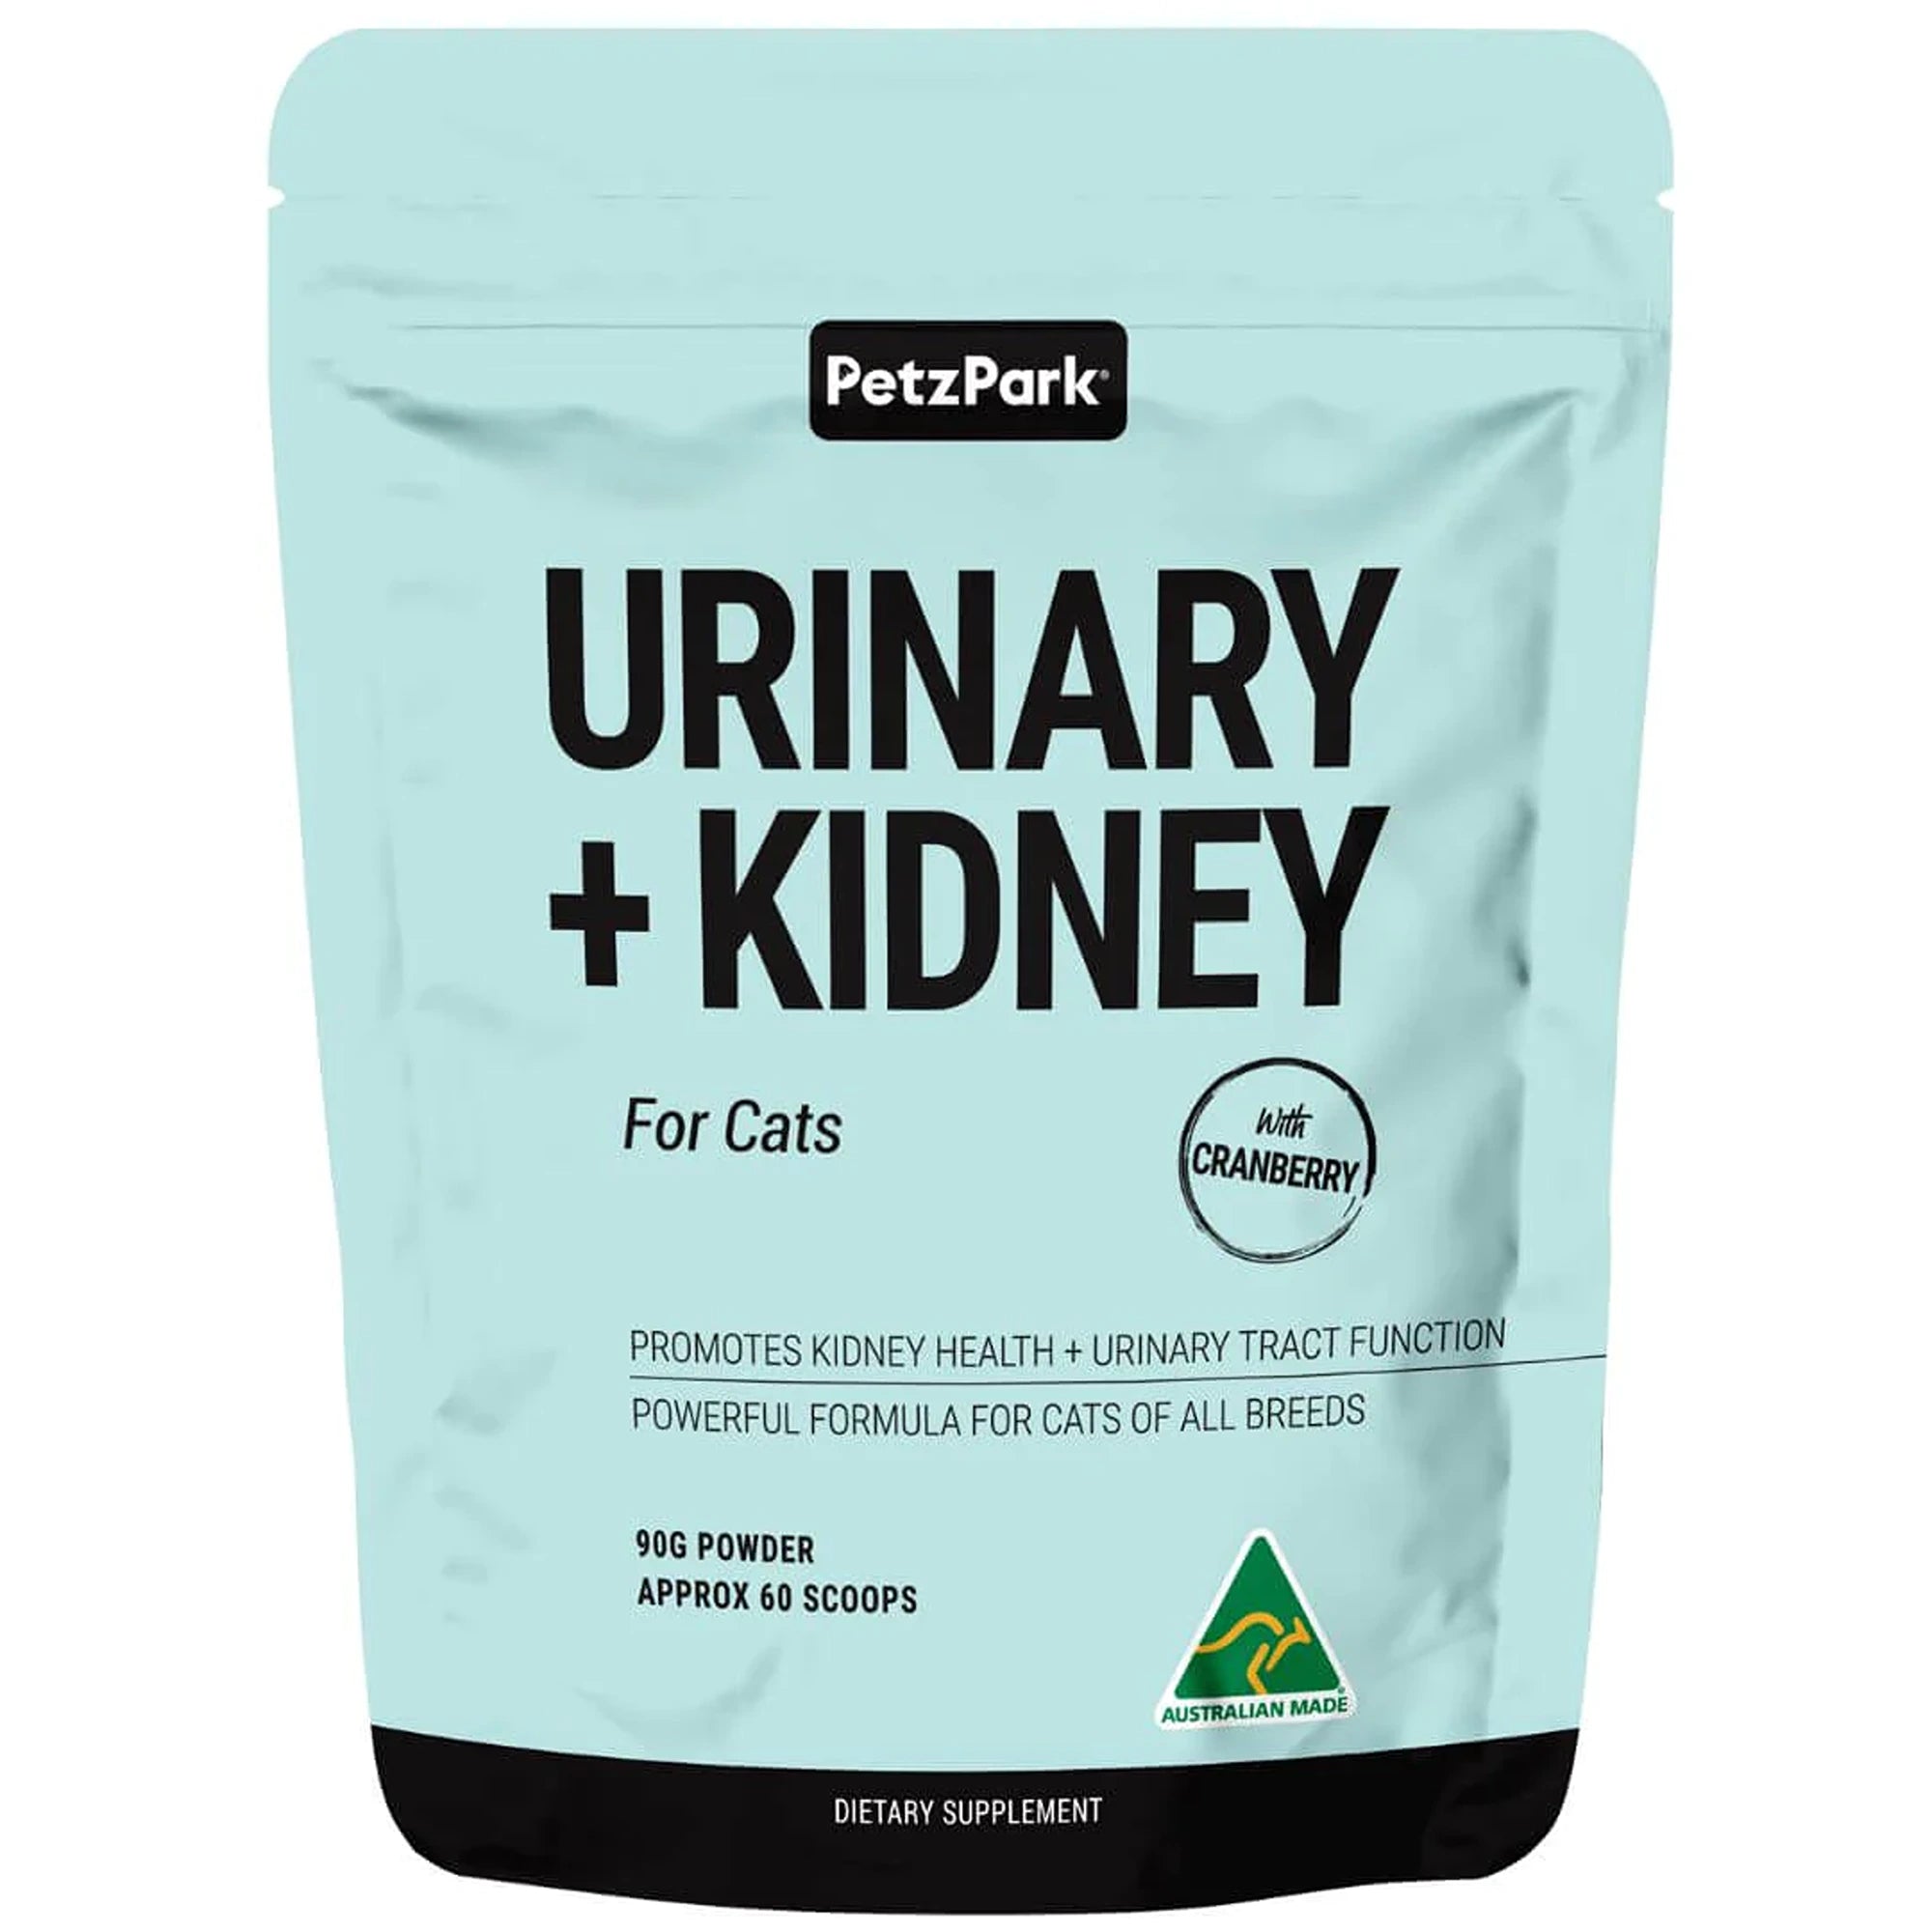 Petz Park Urinary + Kidney for Cats 60 Scoops